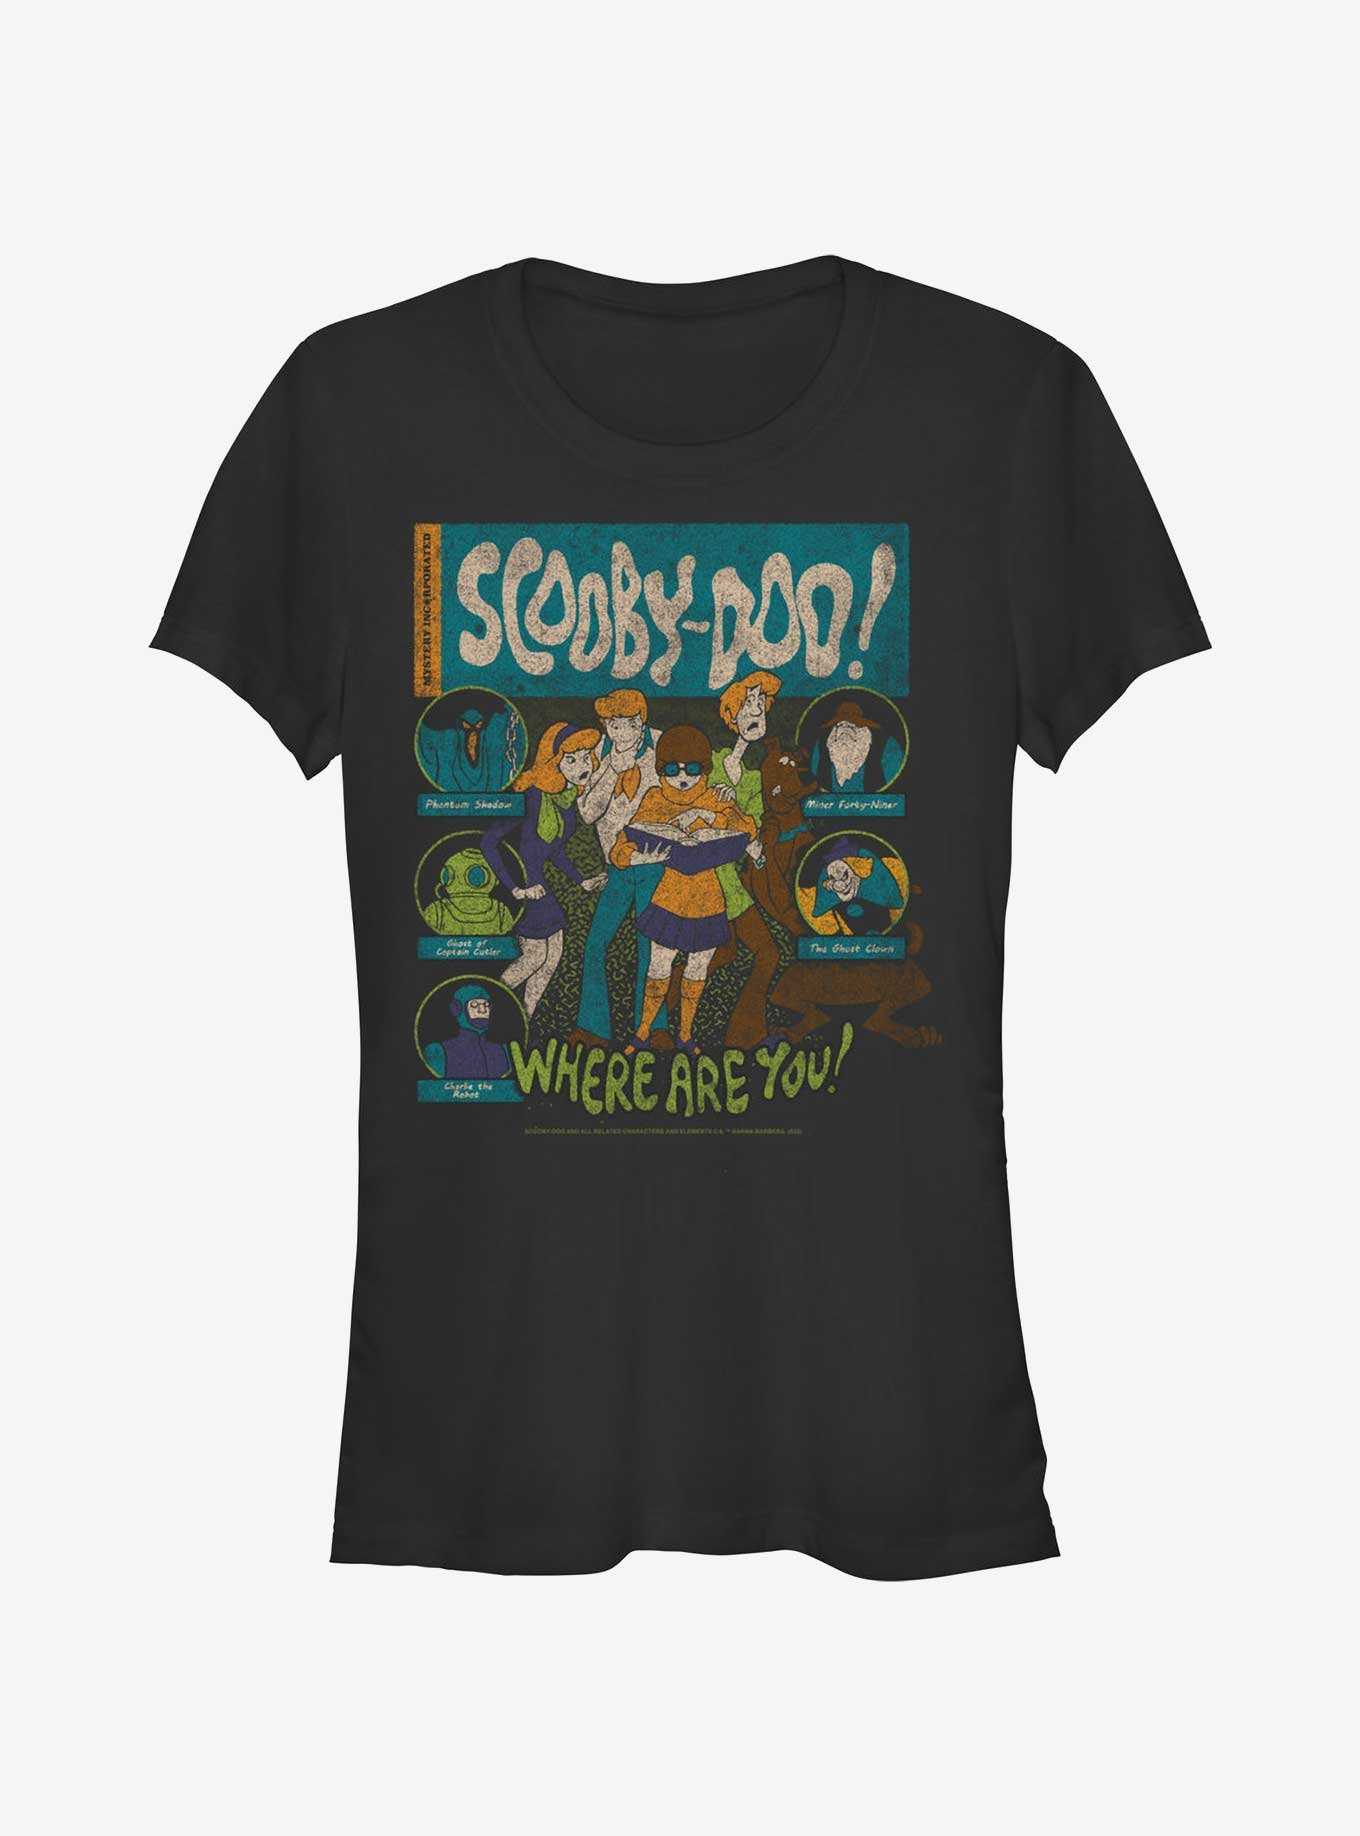 Scooby Doo Mystery Poster Girls T-Shirt, , hi-res